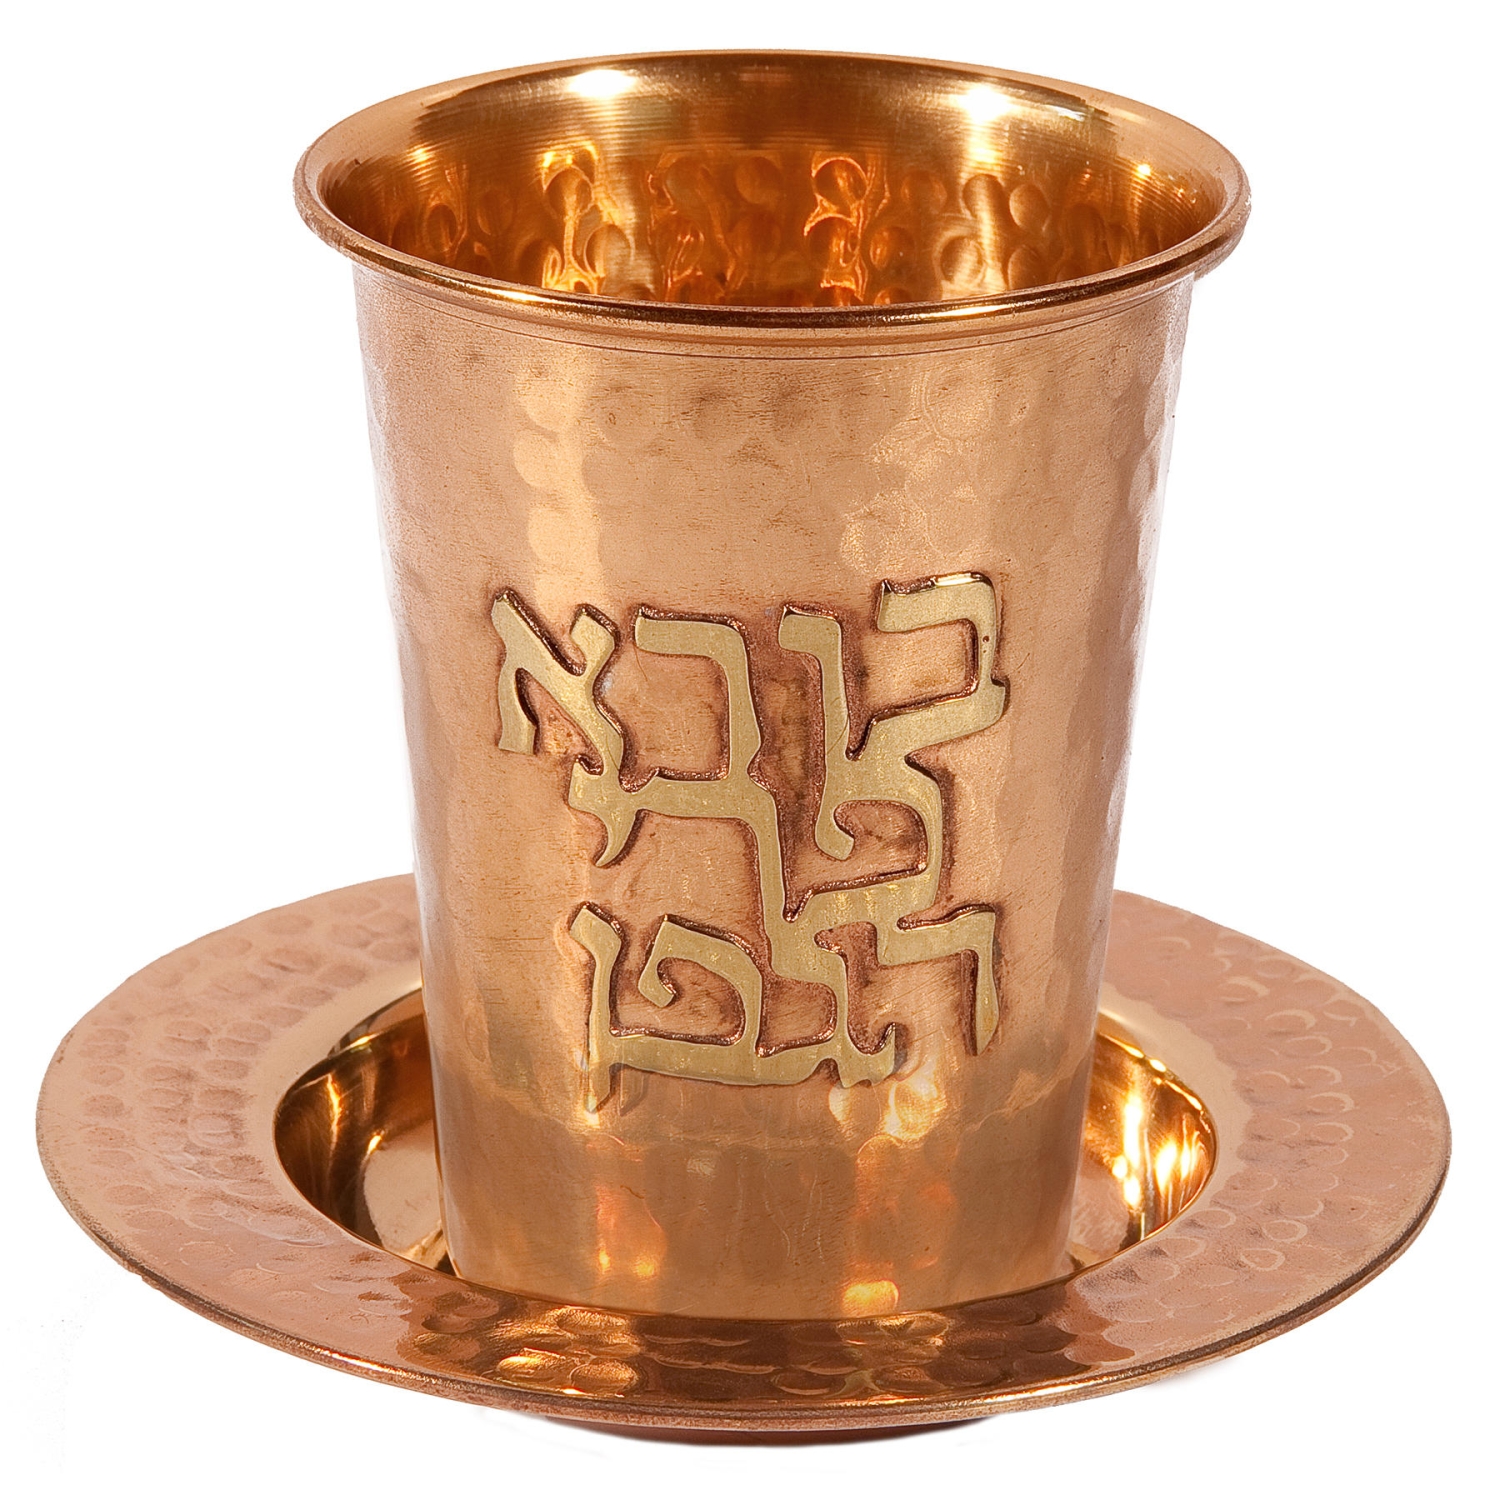 Yair Emanuel Copper Hammered Kiddush Cup and Plate - Wine Blessing - 1